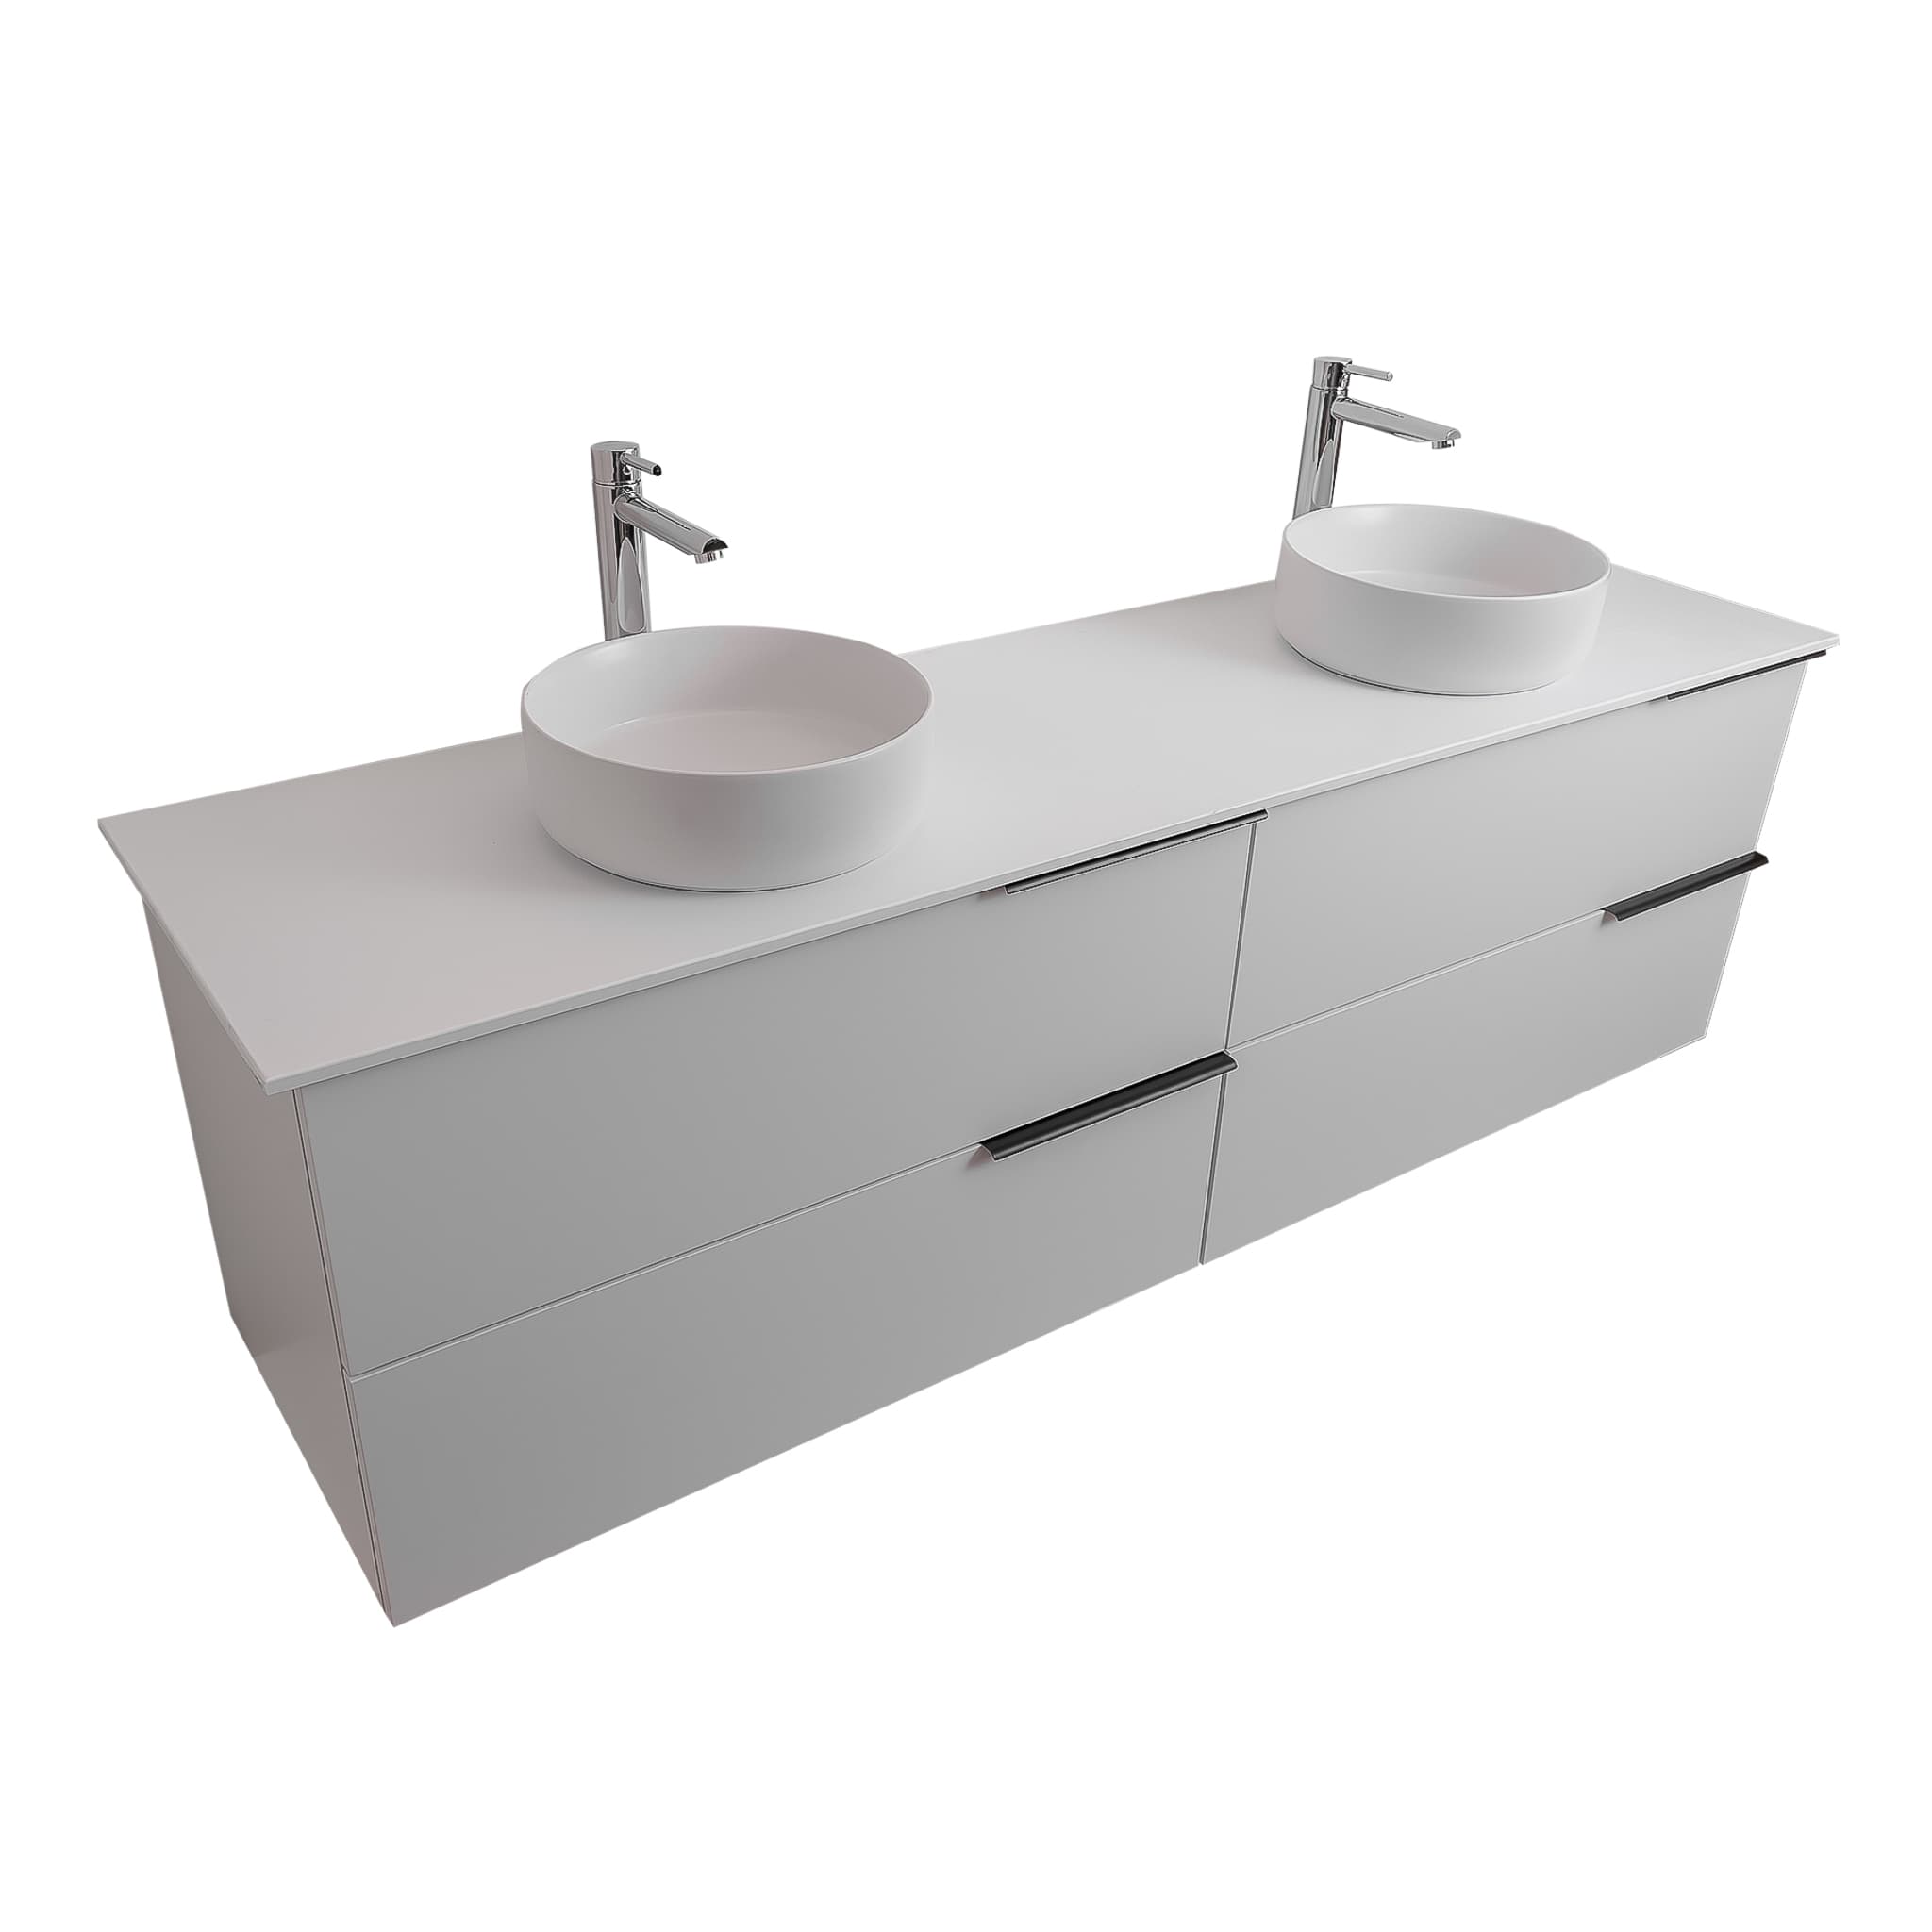 Mallorca 72 Matte White Cabinet, Ares White Top And Two Ares White Ceramic Basin, Wall Mounted Modern Vanity Set